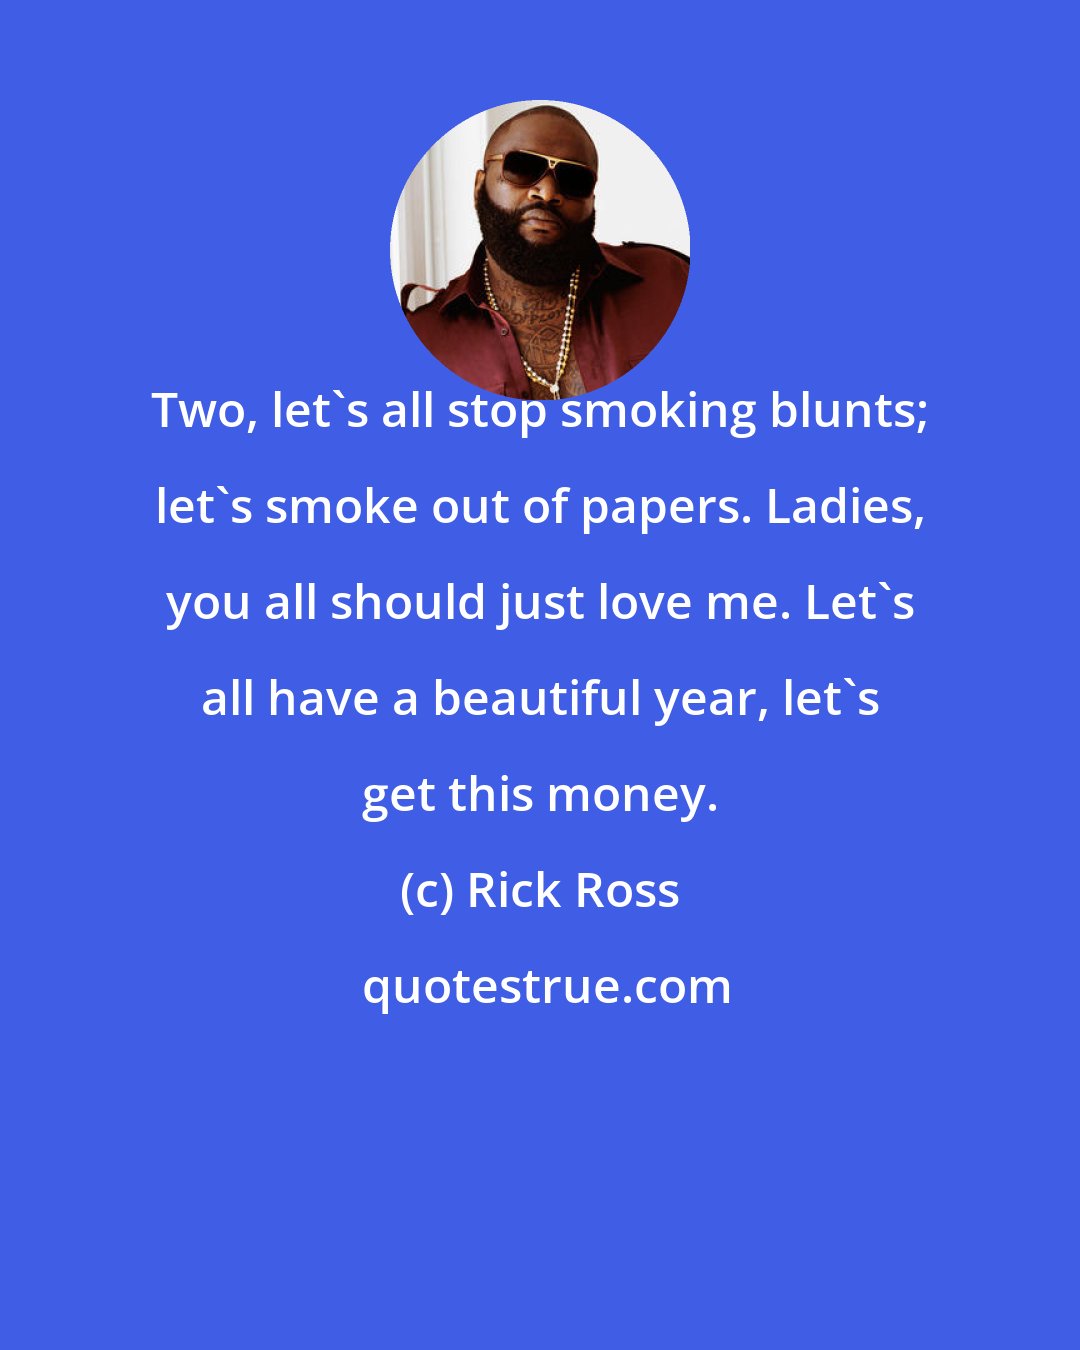 Rick Ross: Two, let's all stop smoking blunts; let's smoke out of papers. Ladies, you all should just love me. Let's all have a beautiful year, let's get this money.